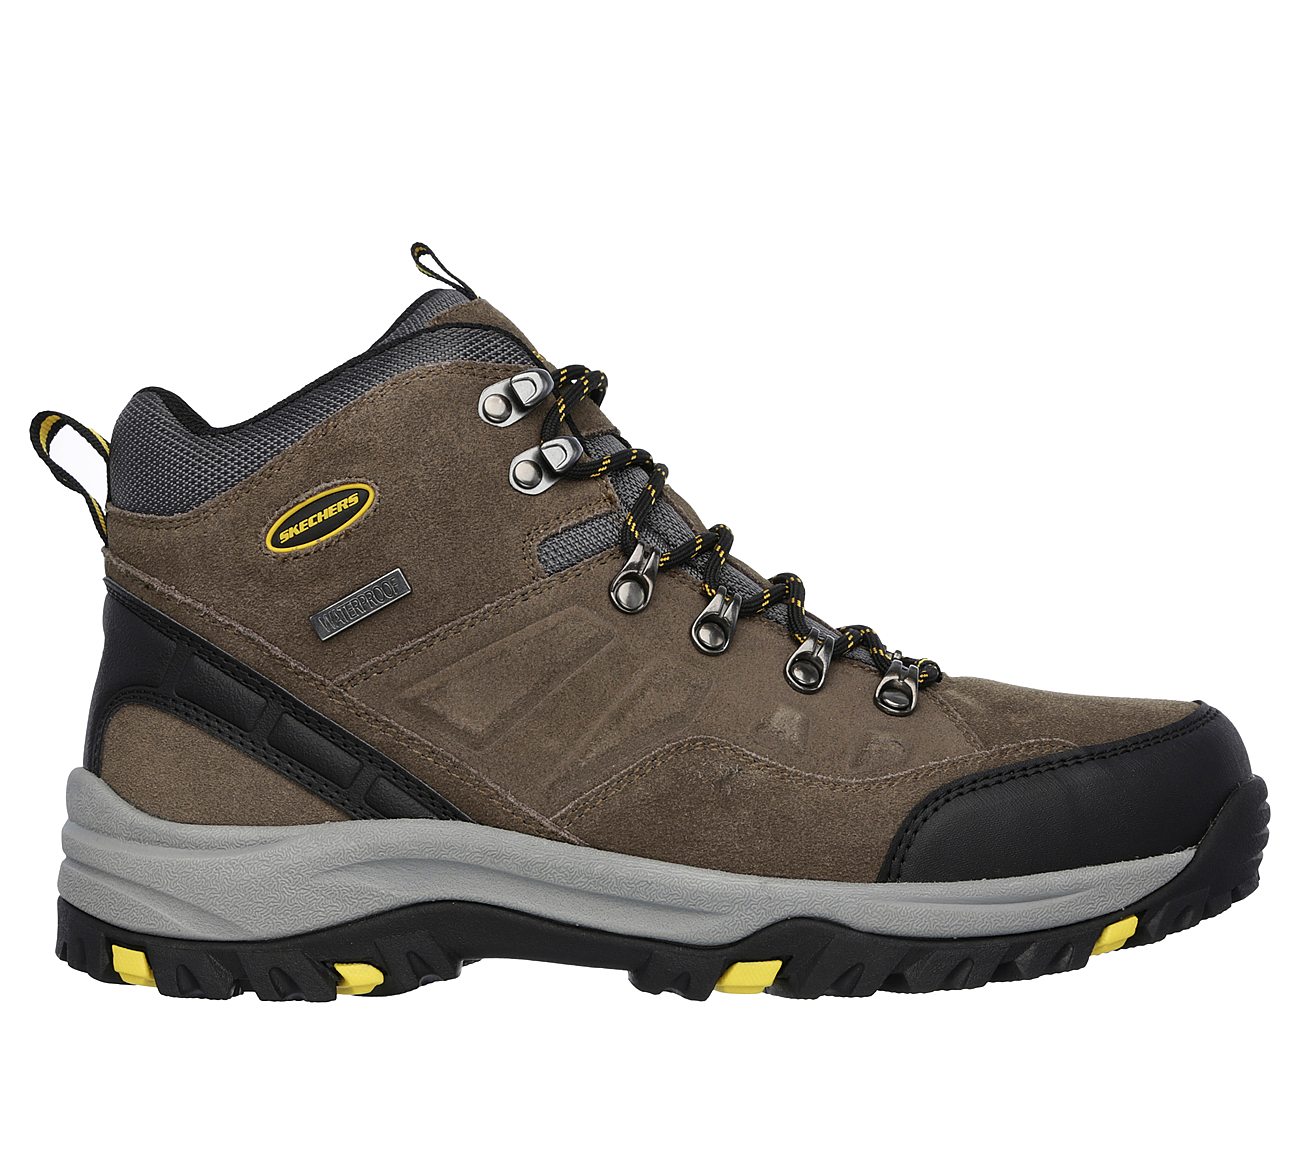 skechers men's relaxed fit resment boots